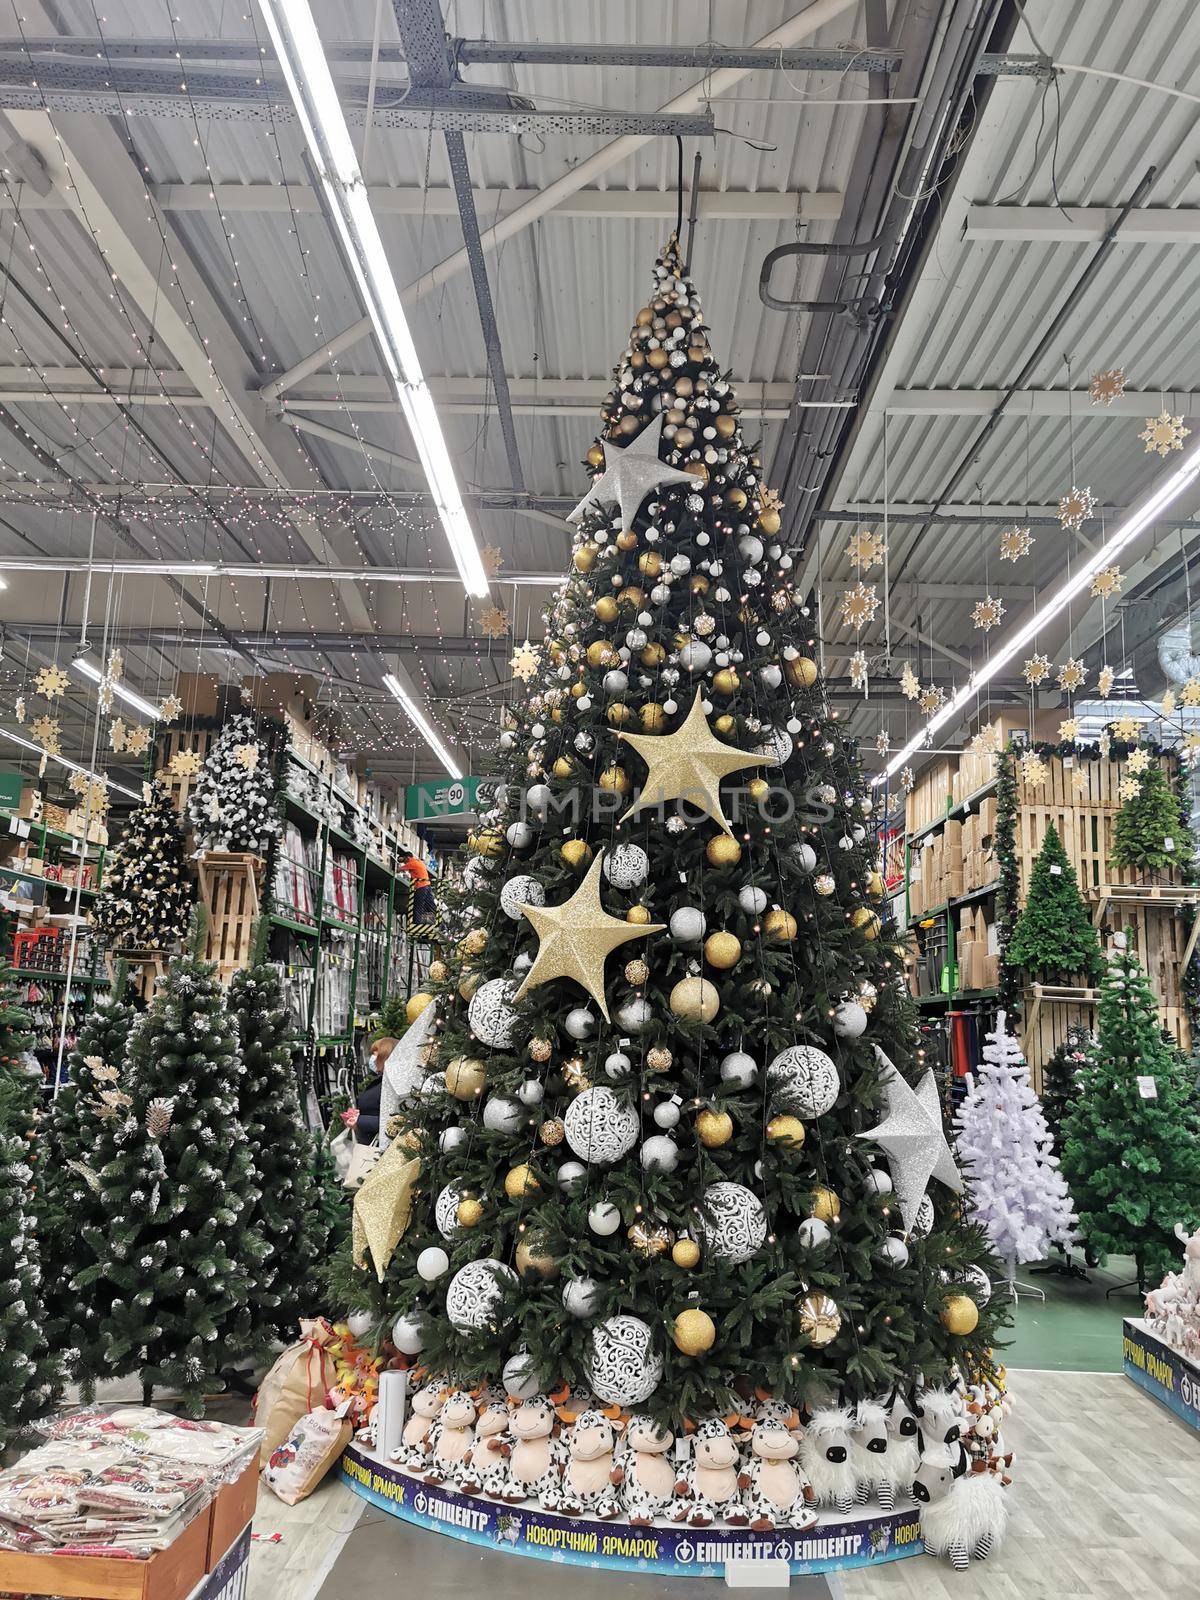 Kyiv, Ukraine - November 1, 2020: Epicenter Shopping for Christmas Holidays, balls and other seasonal art crafted products of modern, vintage and traditional styles in a big supermarket by Andelov13